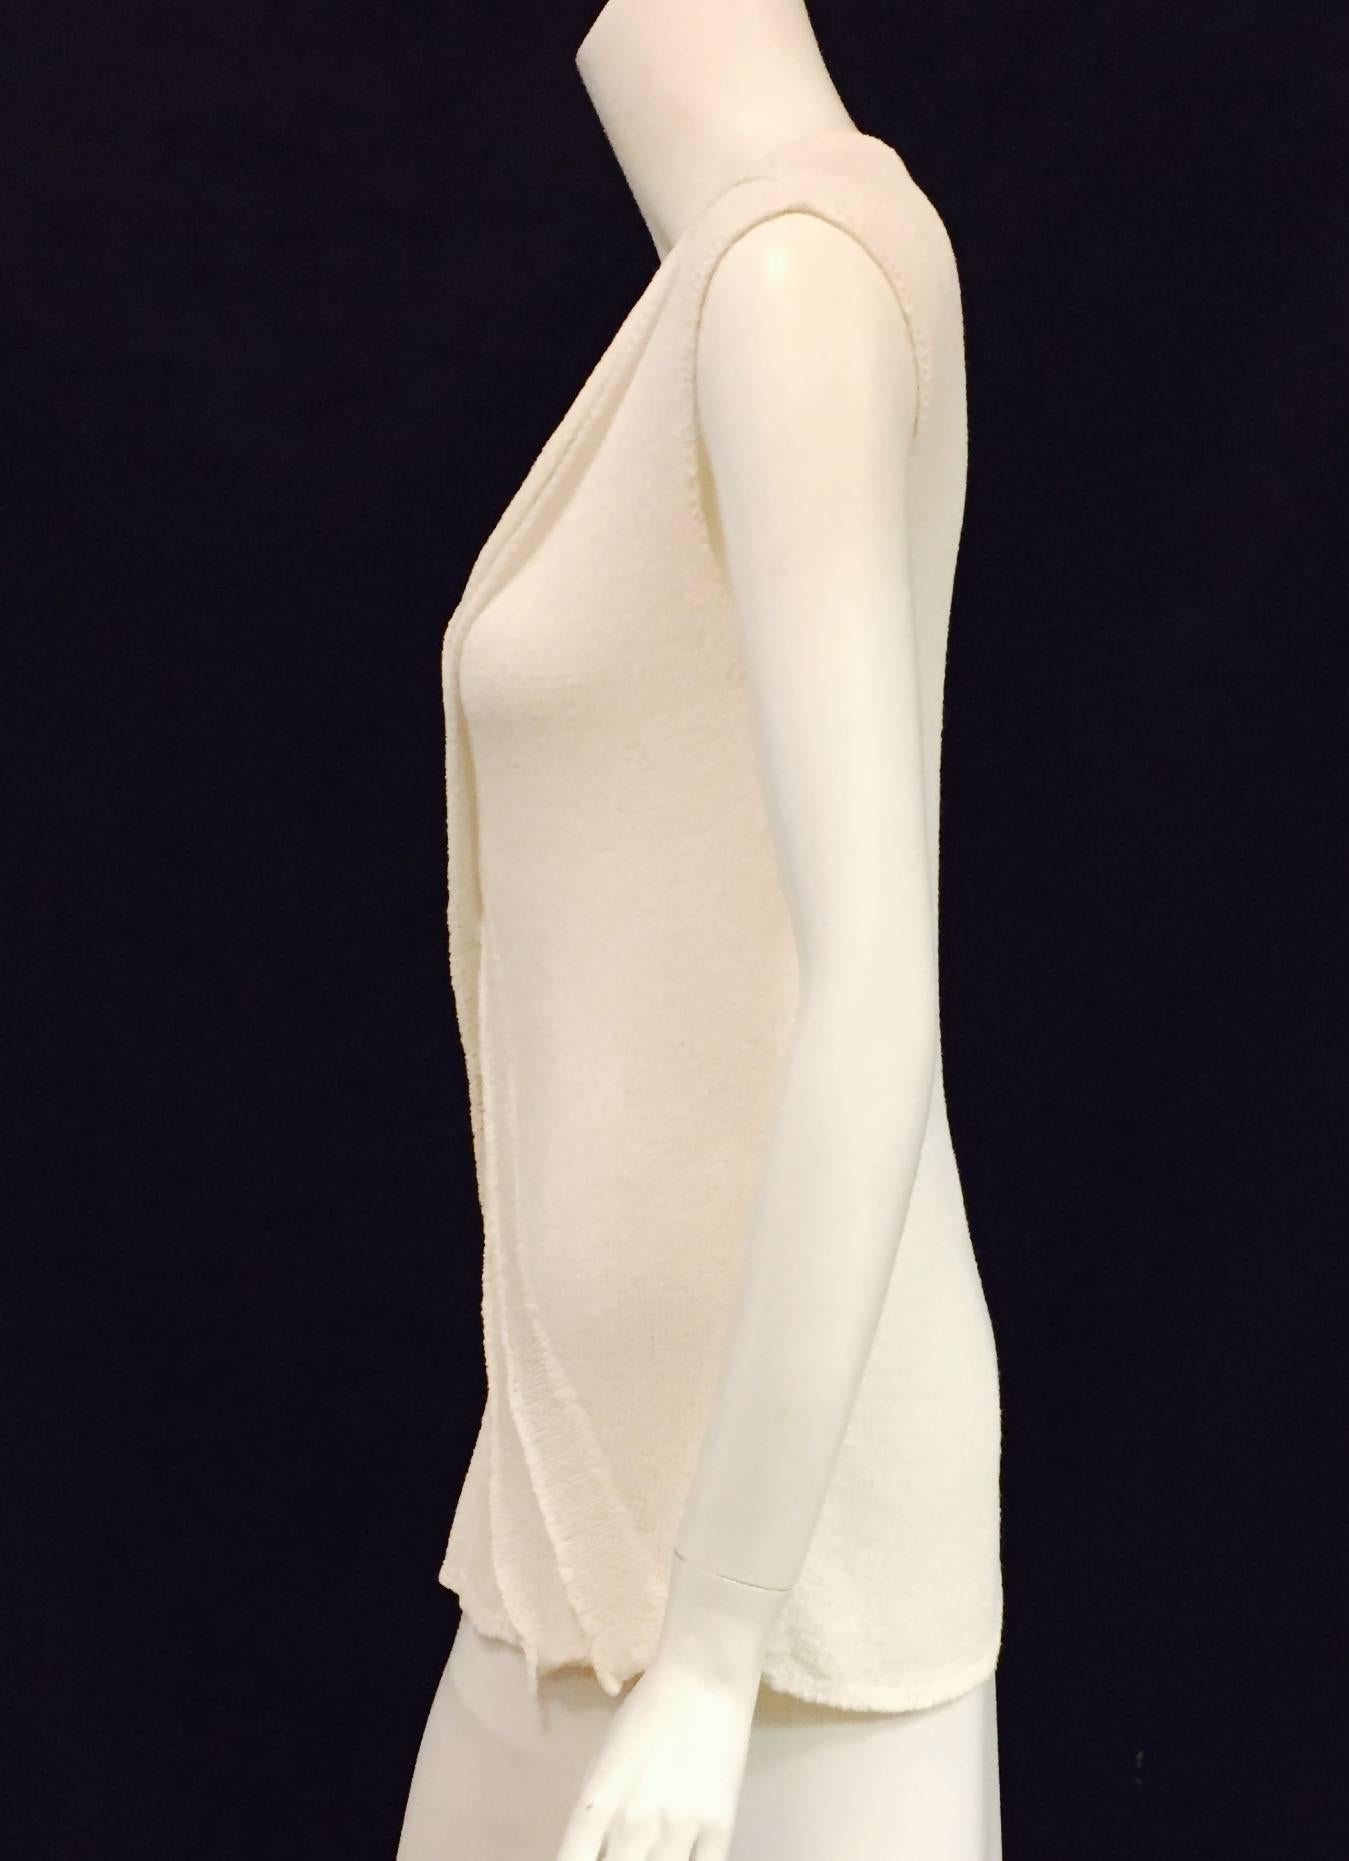 Chanel Longer Length Ivory Stretch Top With V-Neckline and Cap Sleeves  In Excellent Condition For Sale In Palm Beach, FL